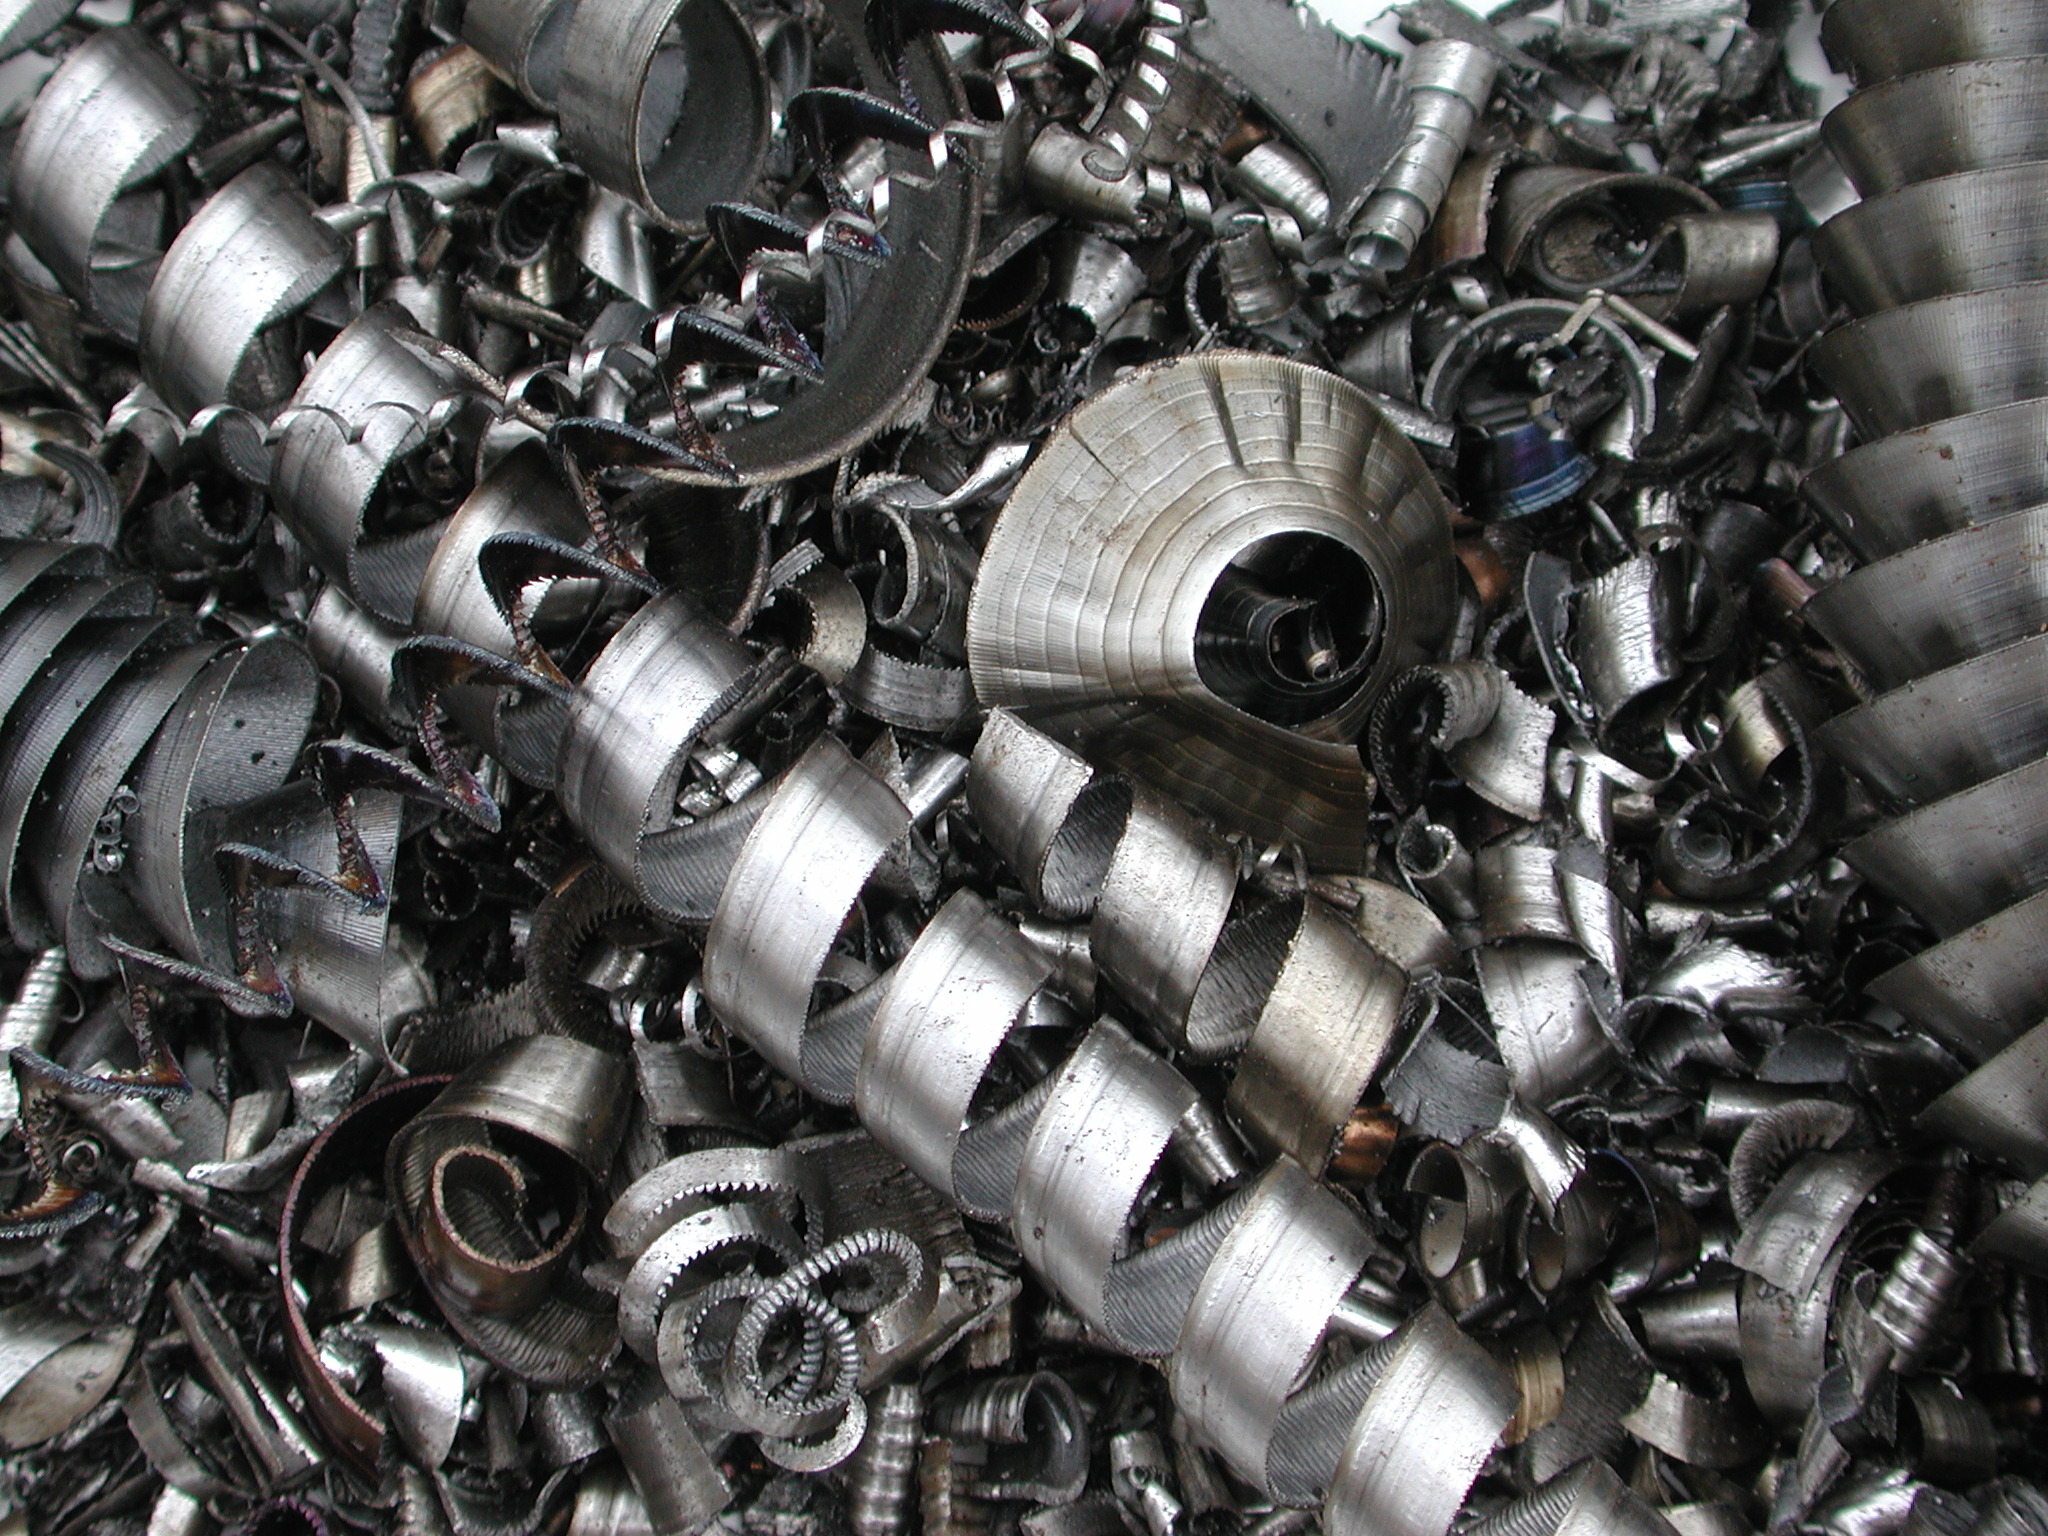 Metal Recycling Corp. Acquires Sol Alman Co.